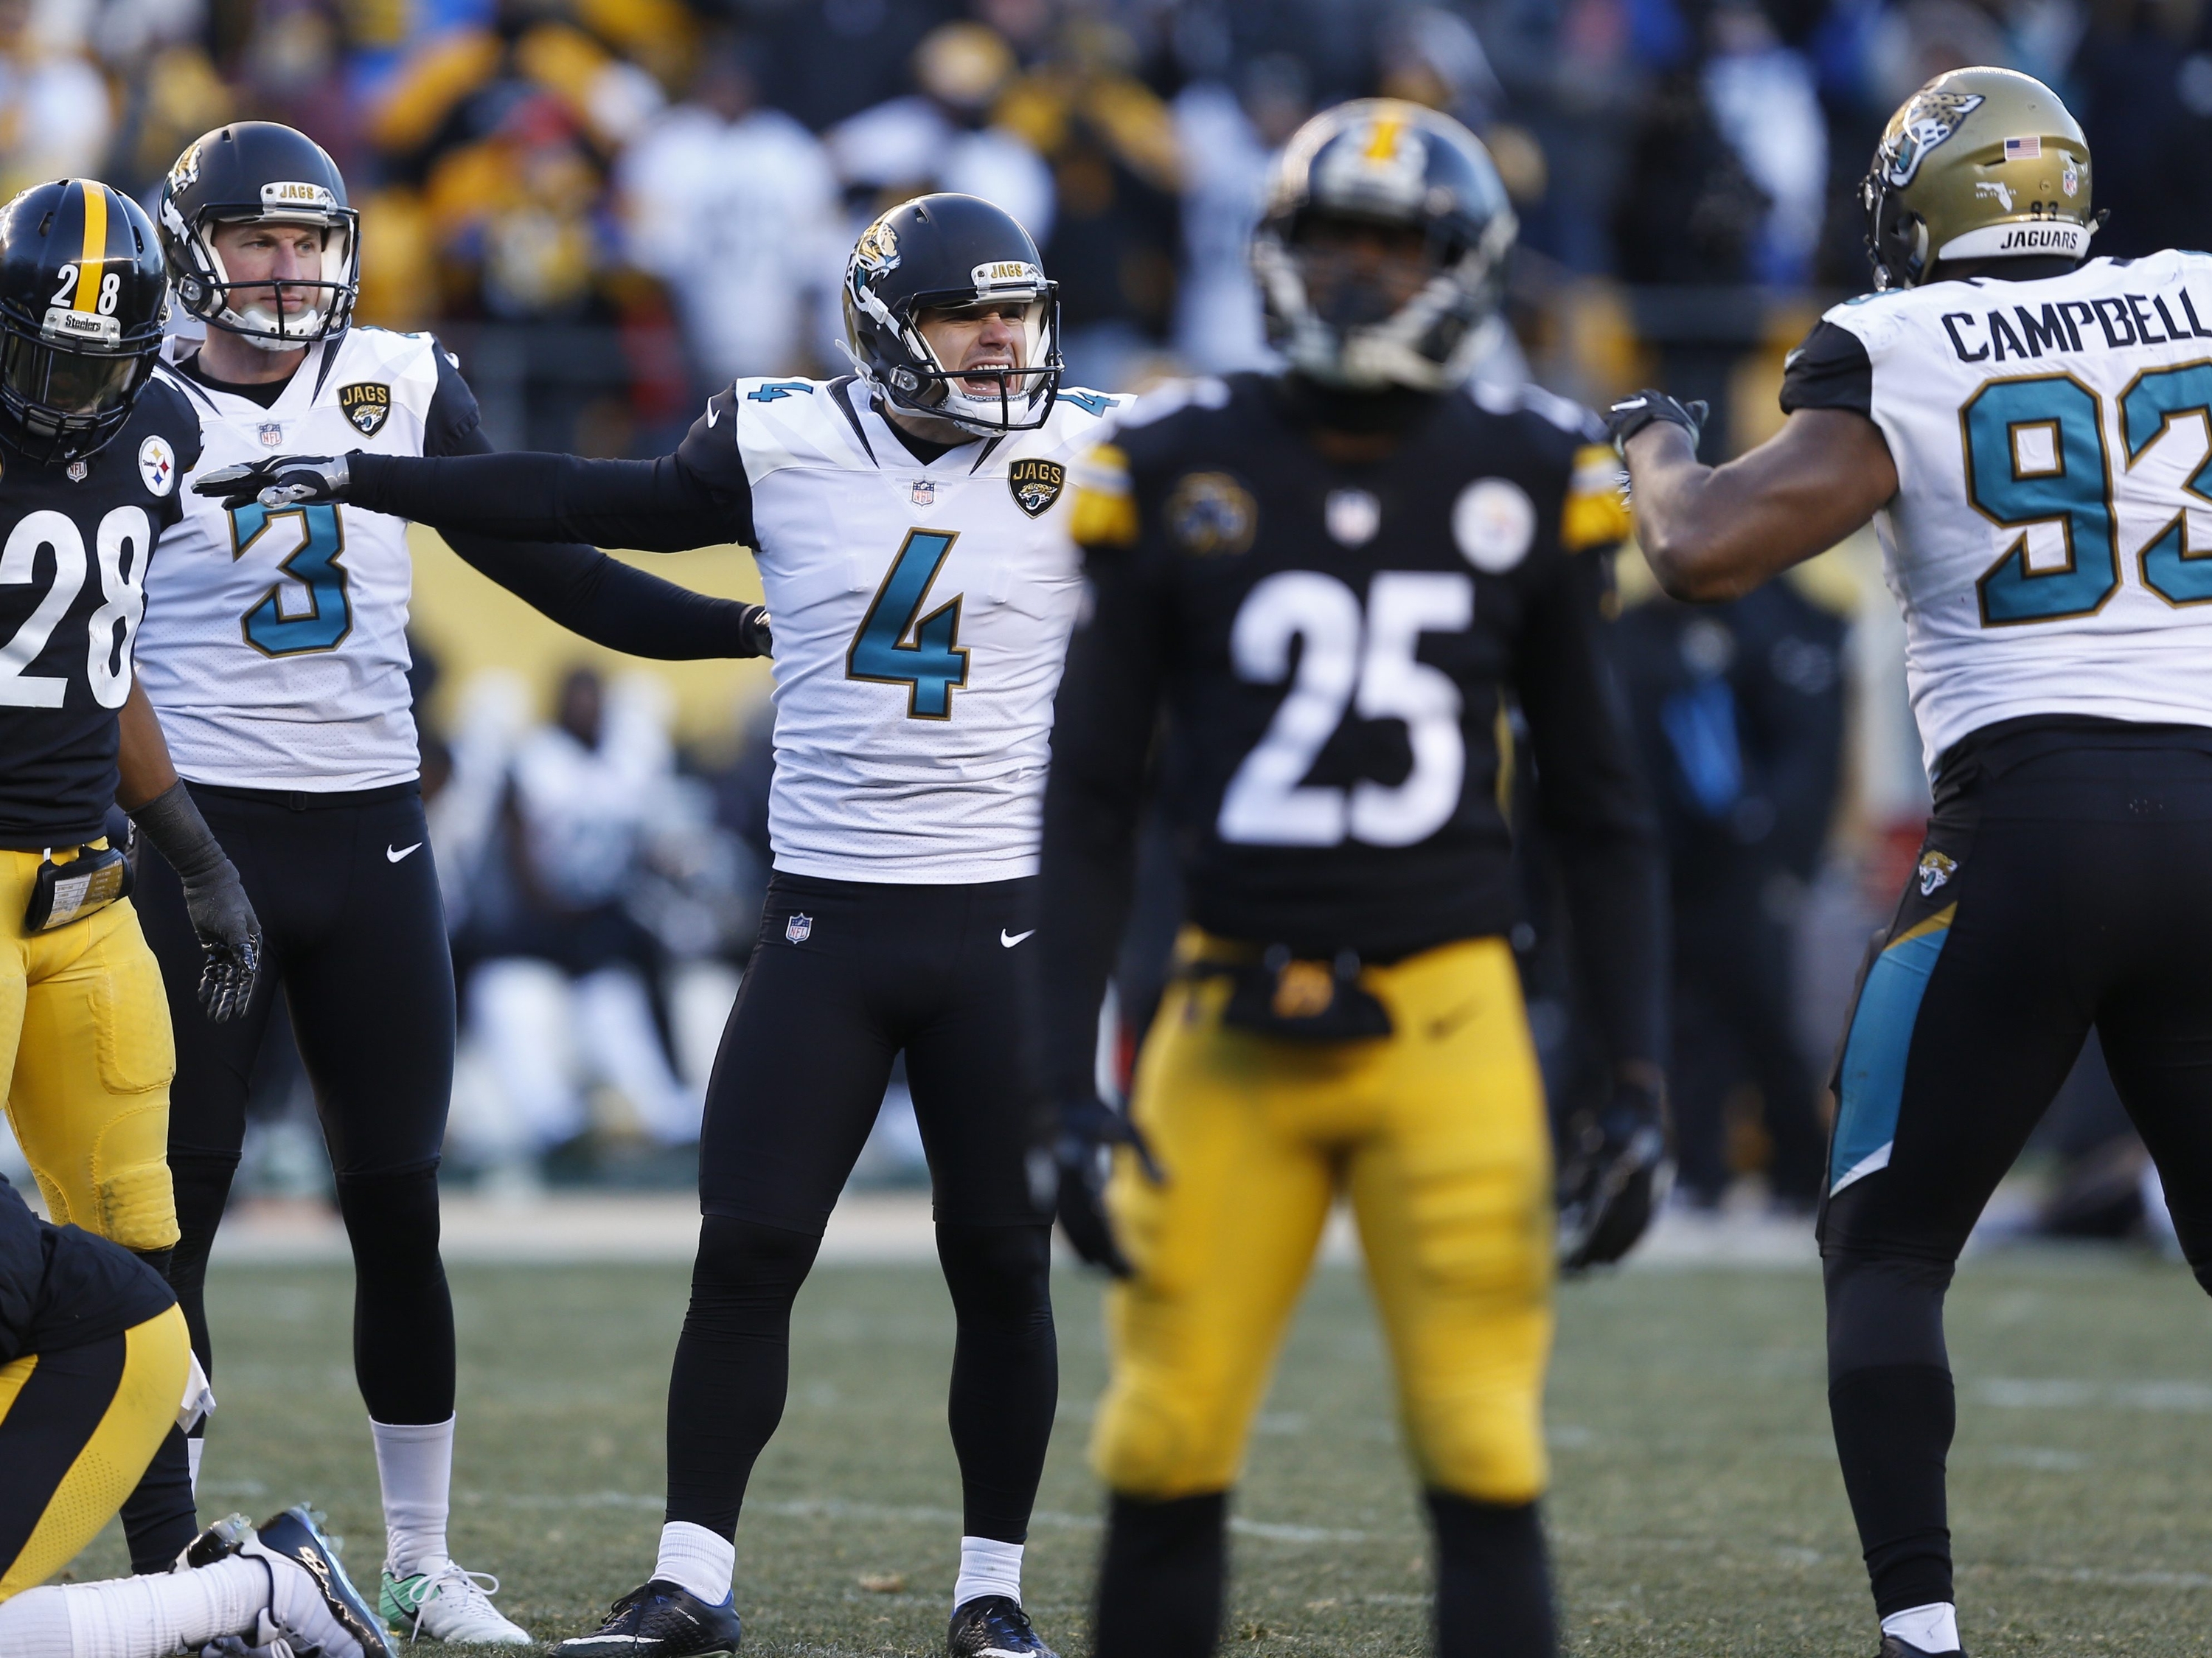 KYRK: Jaguars thump over-confident Steelers' butts -- again